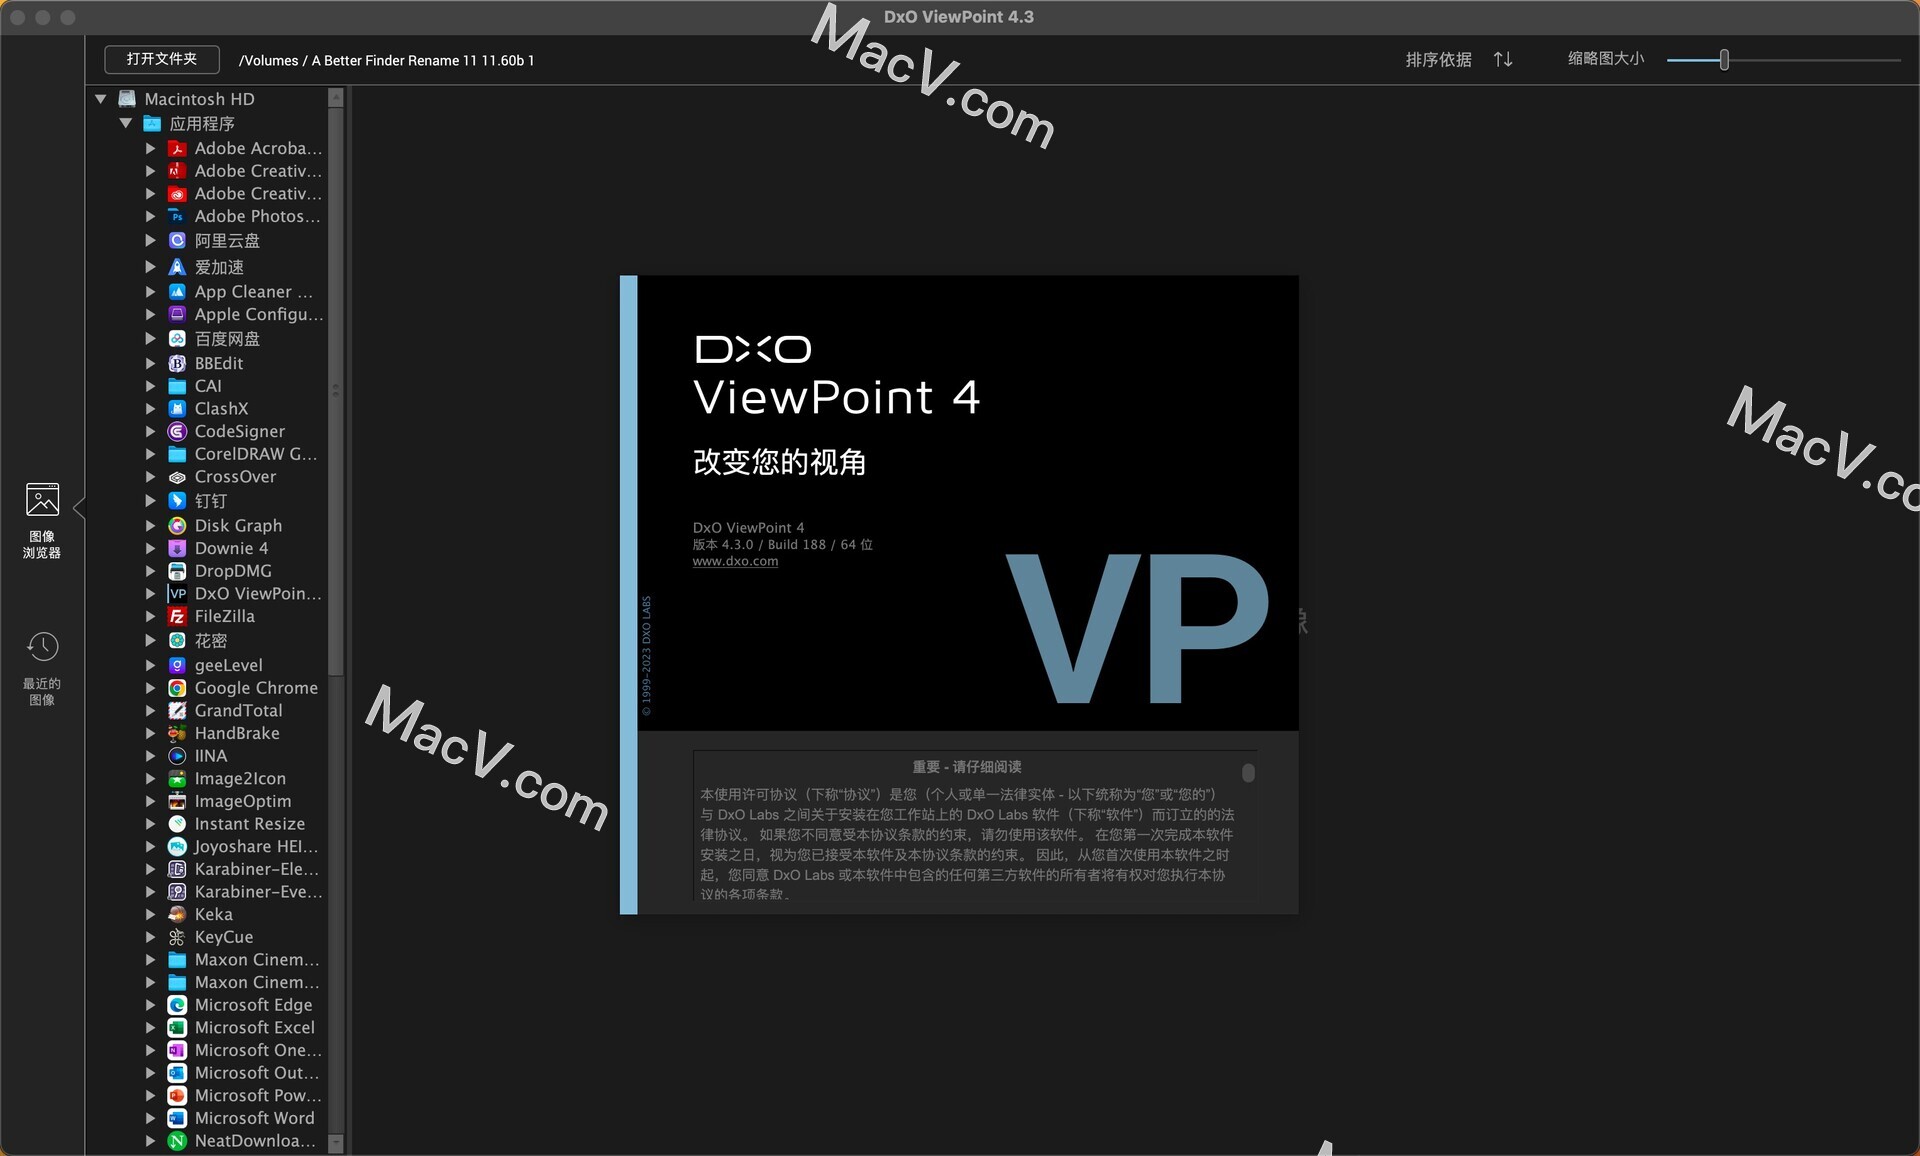 download the last version for mac DxO ViewPoint 4.10.0.250